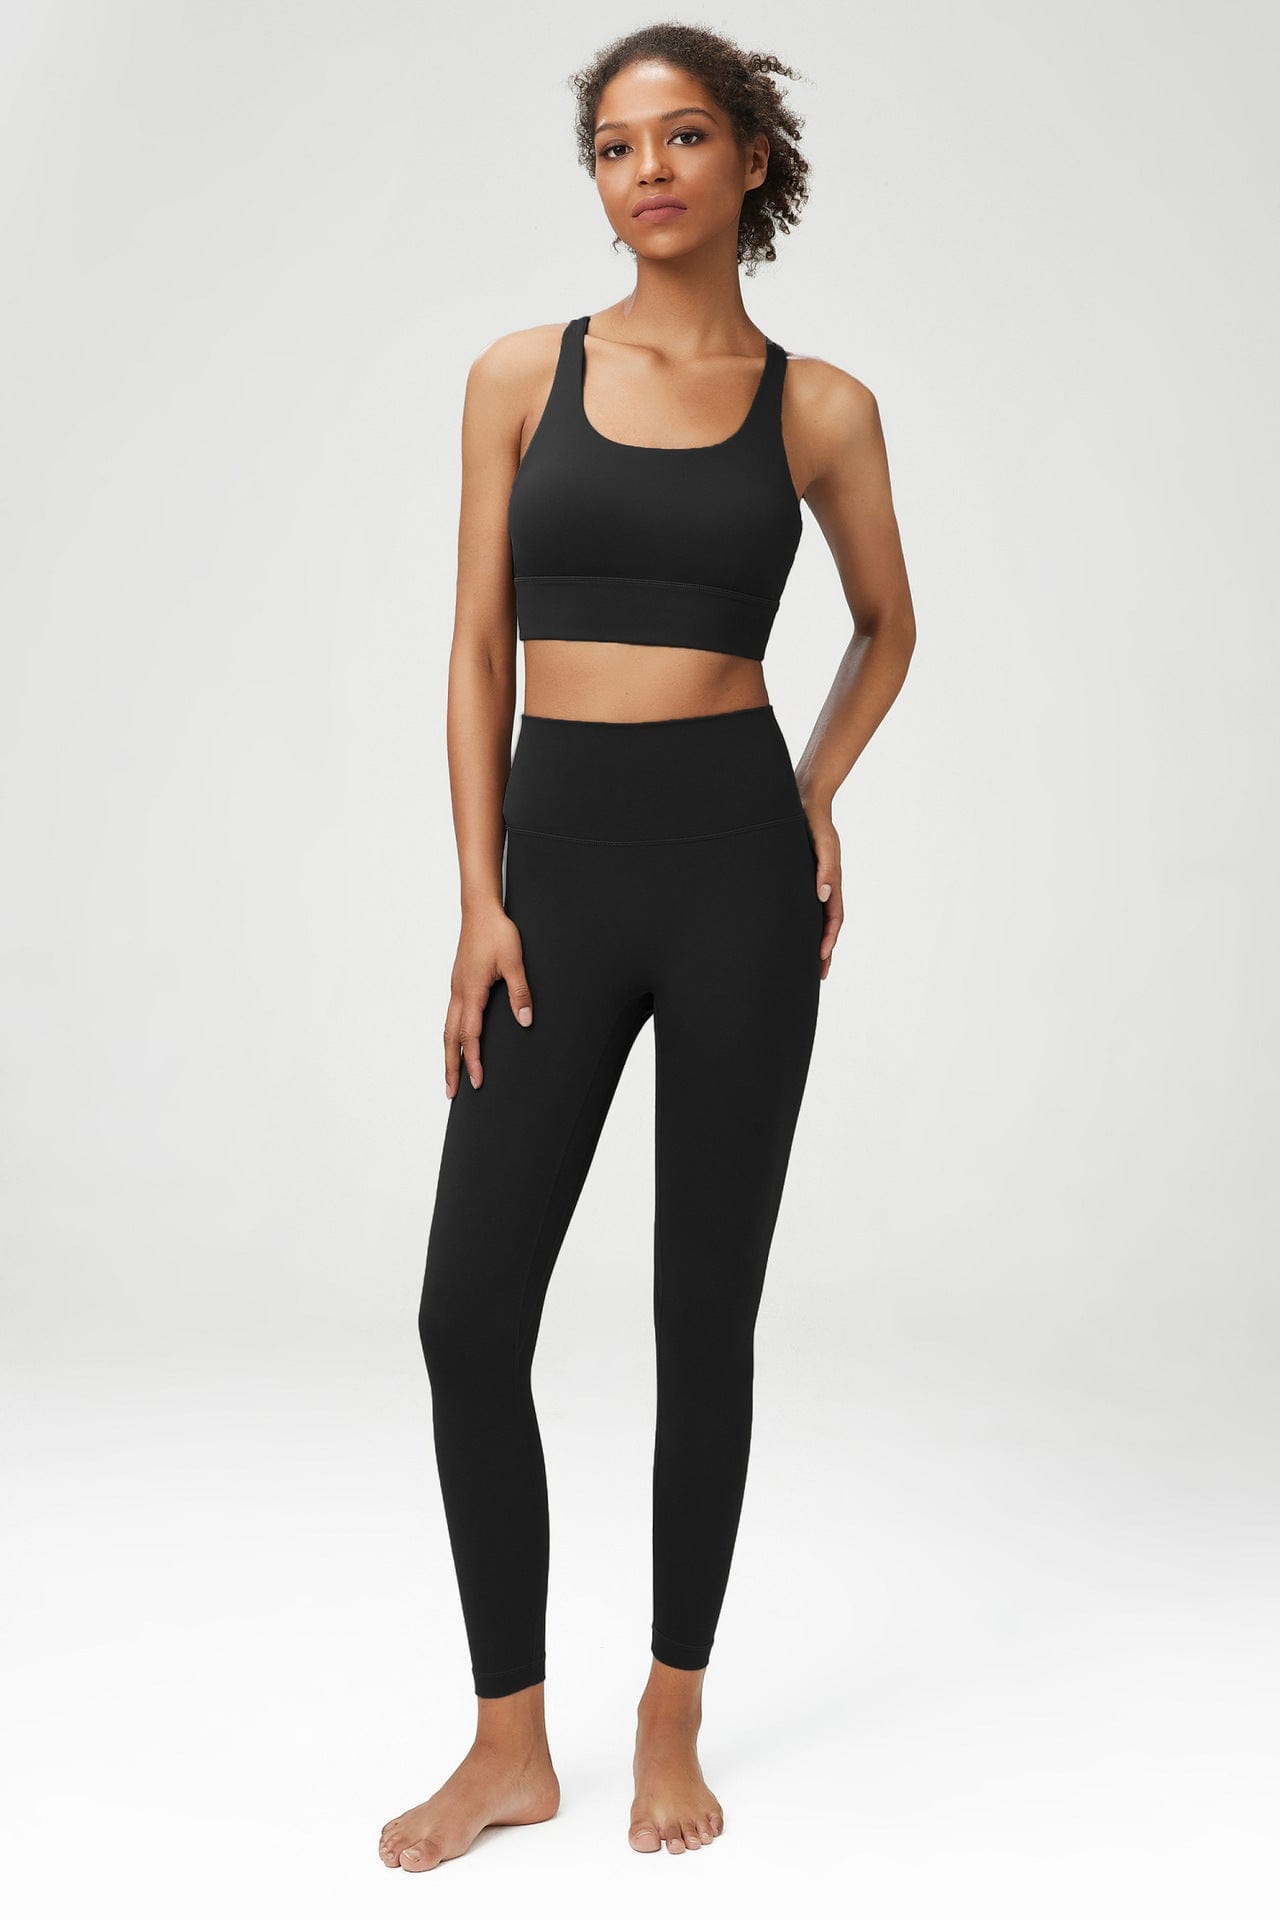 Fitness and YOGA pants – Authentic Shape